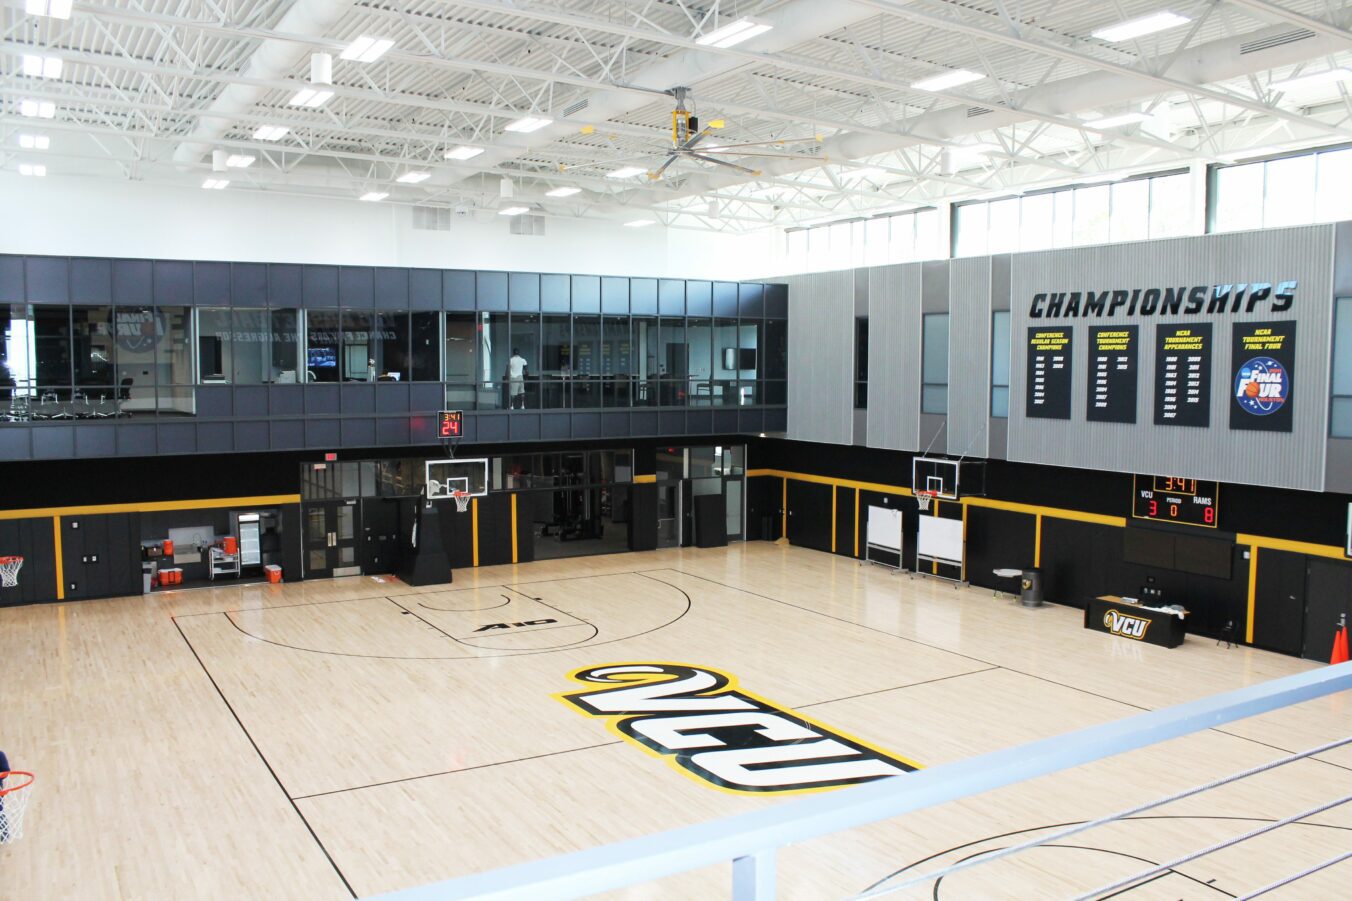 View from second floor of VCU's practice basketball court